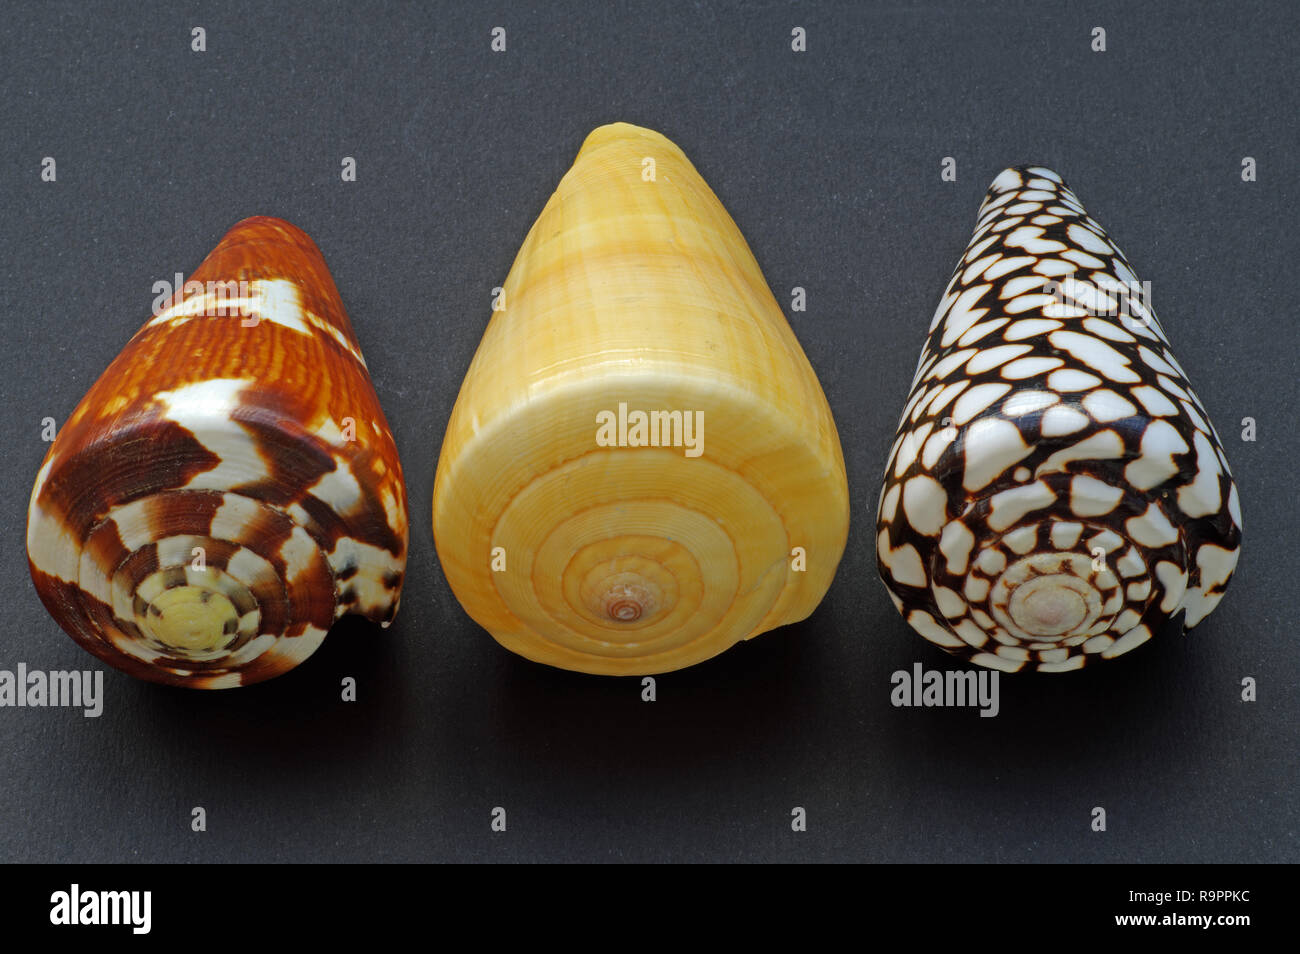 tre shells of Conidae (marine cone snails). The right picture is from the species Conus marmoreus. Stock Photo